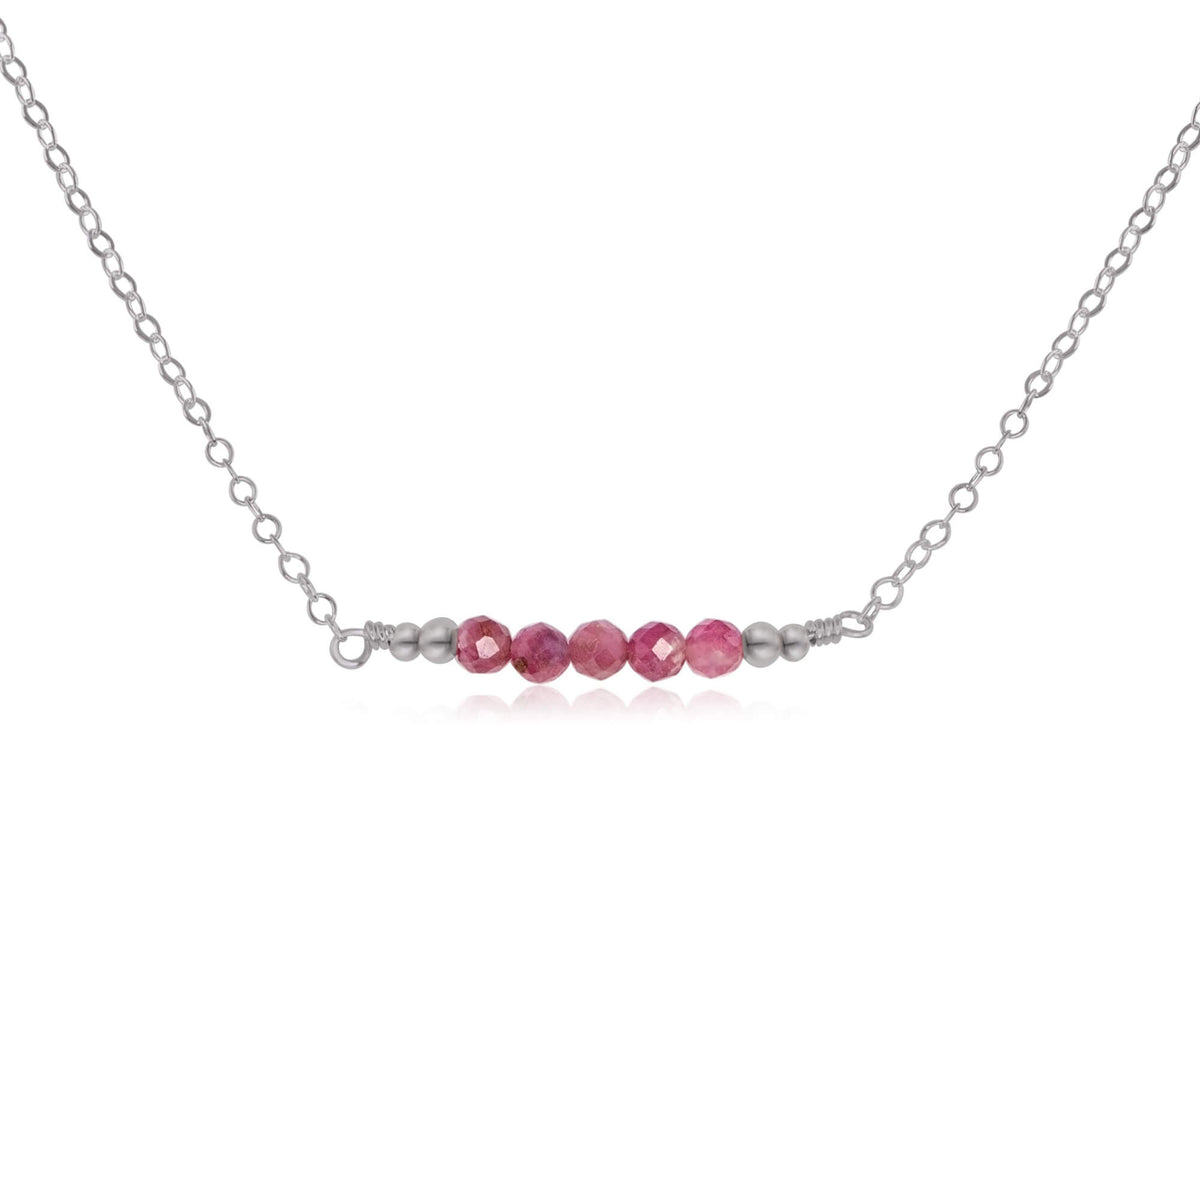 Faceted Bead Bar Necklace - Pink Tourmaline - Stainless Steel - Luna Tide Handmade Jewellery